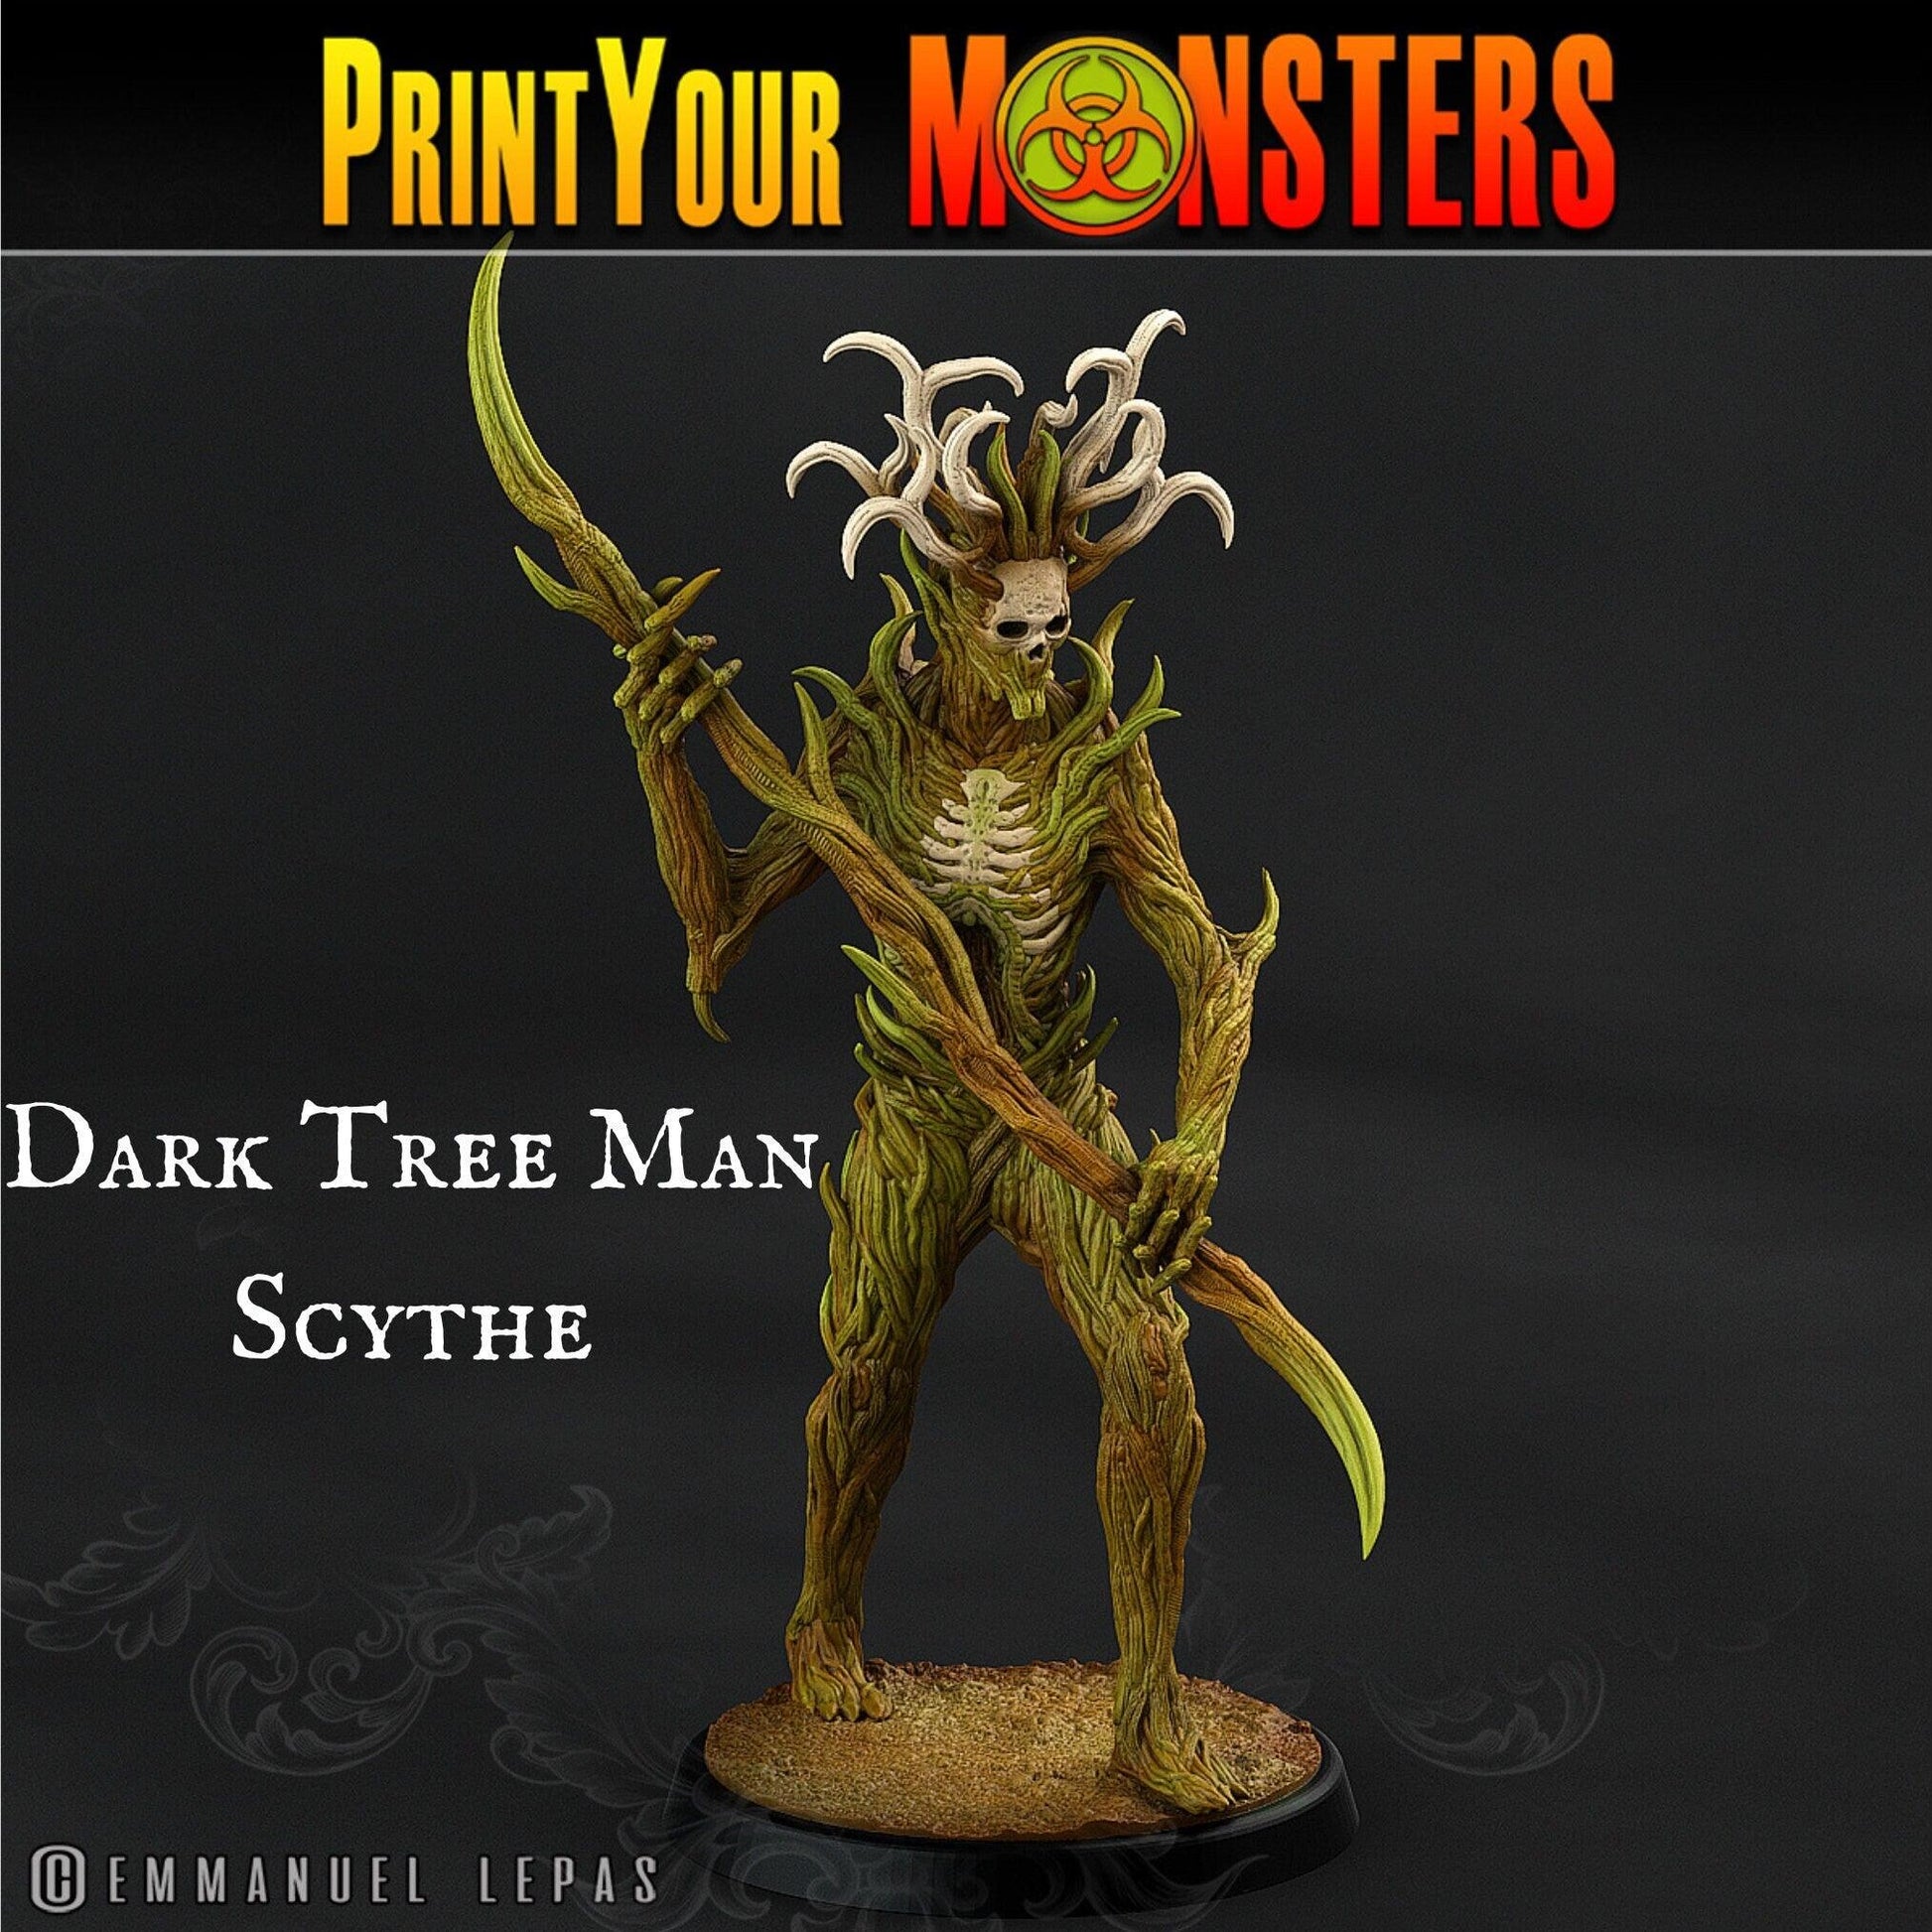 Dark Tree Man Champion Miniatures | Print Your Monsters | Tabletop gaming | DnD Miniature | Dungeons and Dragons, dnd 5e dnd treant - Plague Miniatures shop for DnD Miniatures